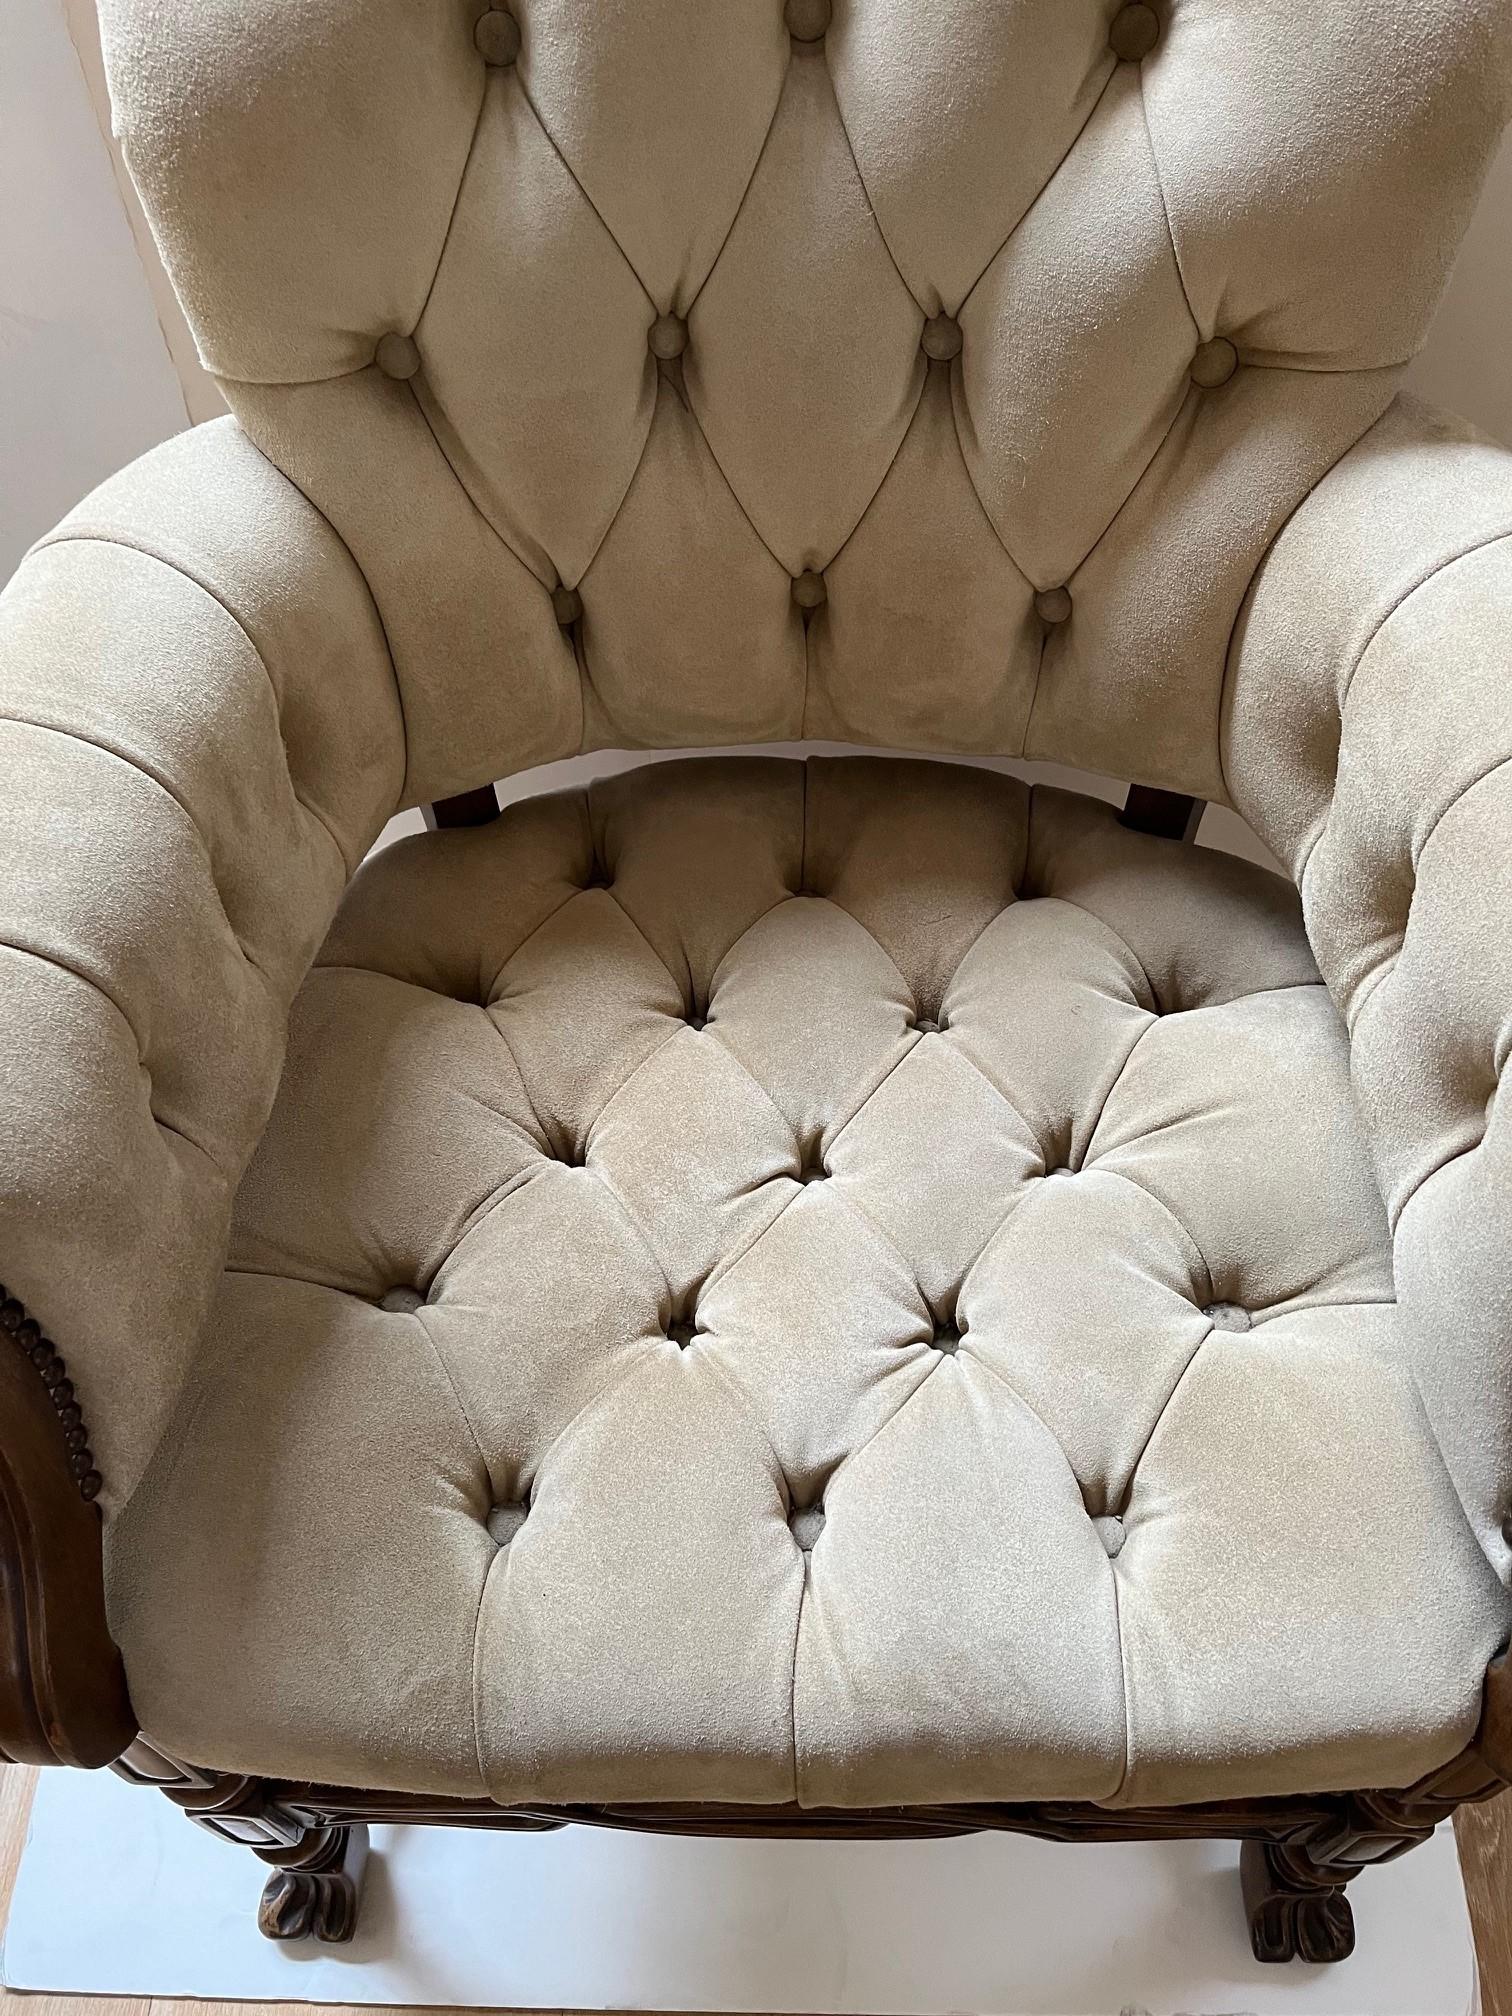 Made to Order Elegant Seville Armchair Upholstered in Beige Suede Leather, Tufted Seat and Back, Petite Antique Brass Nail Head Trim at Seat, Arms, and outside back, Carved Hardwood Frame with Front Stretcher Finished in Medium Walnut. This is a